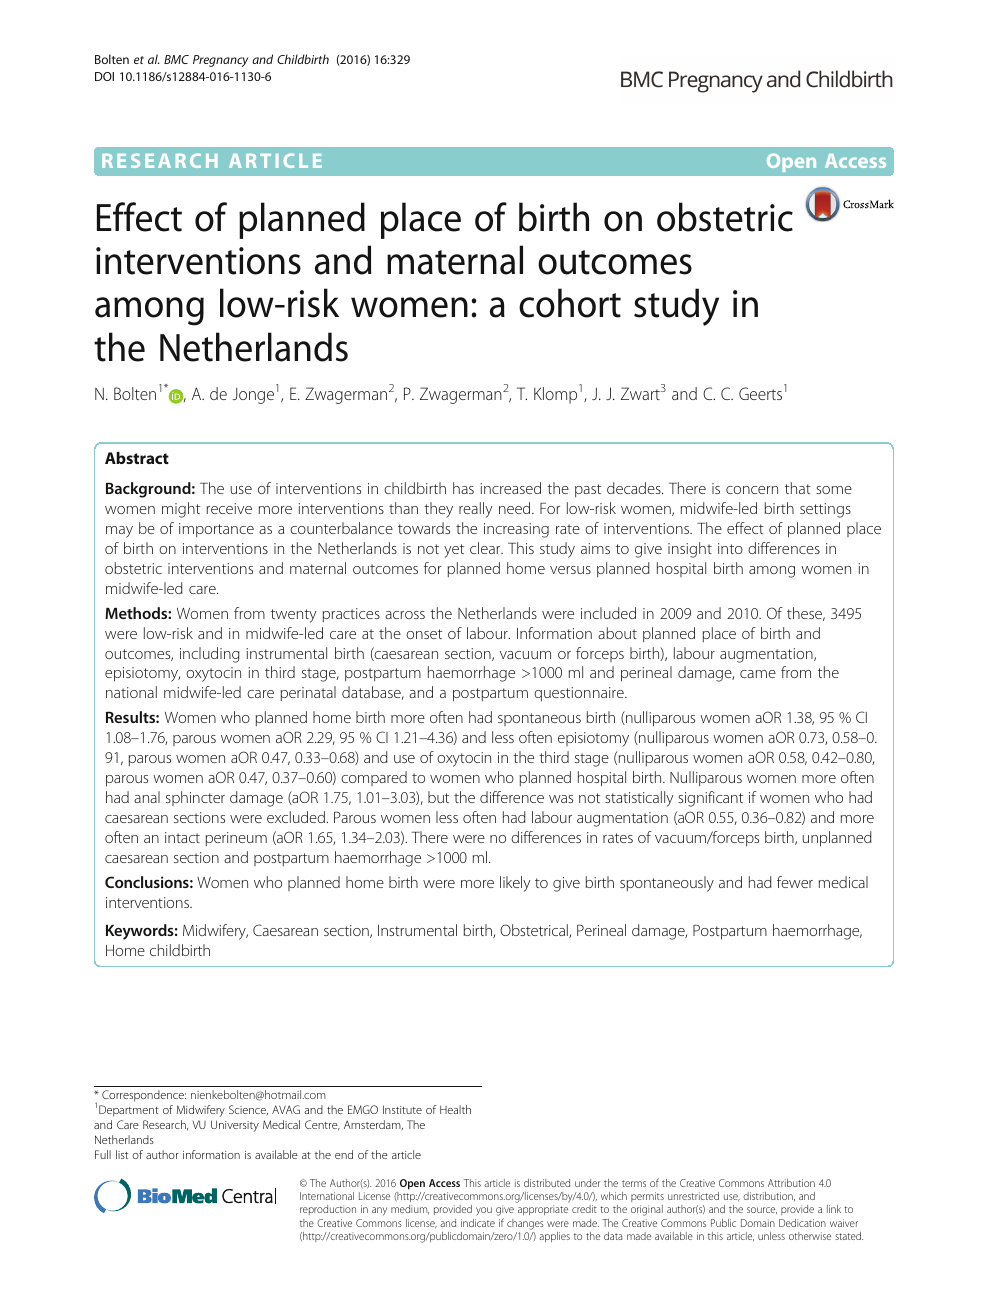 Effect Of Planned Place Of Birth On Obstetric Interventions And Maternal Outcomes Among Low Risk Women A Cohort Study In The Netherlands Topic Of Research Paper In Health Sciences Download Scholarly Article